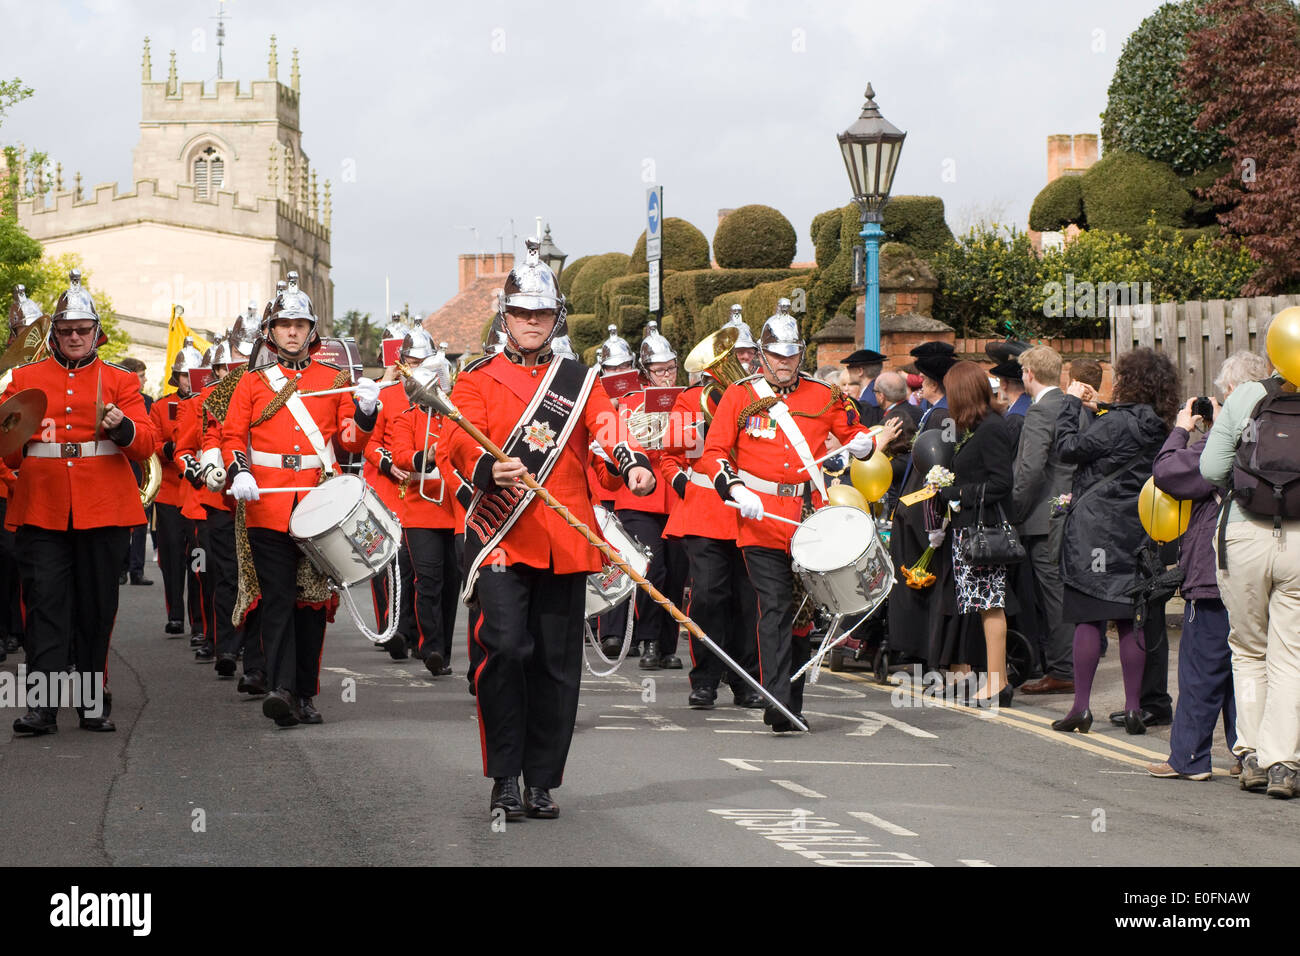 Marching brass band walking down the high street in Stratford upon Avon England Stock Photo